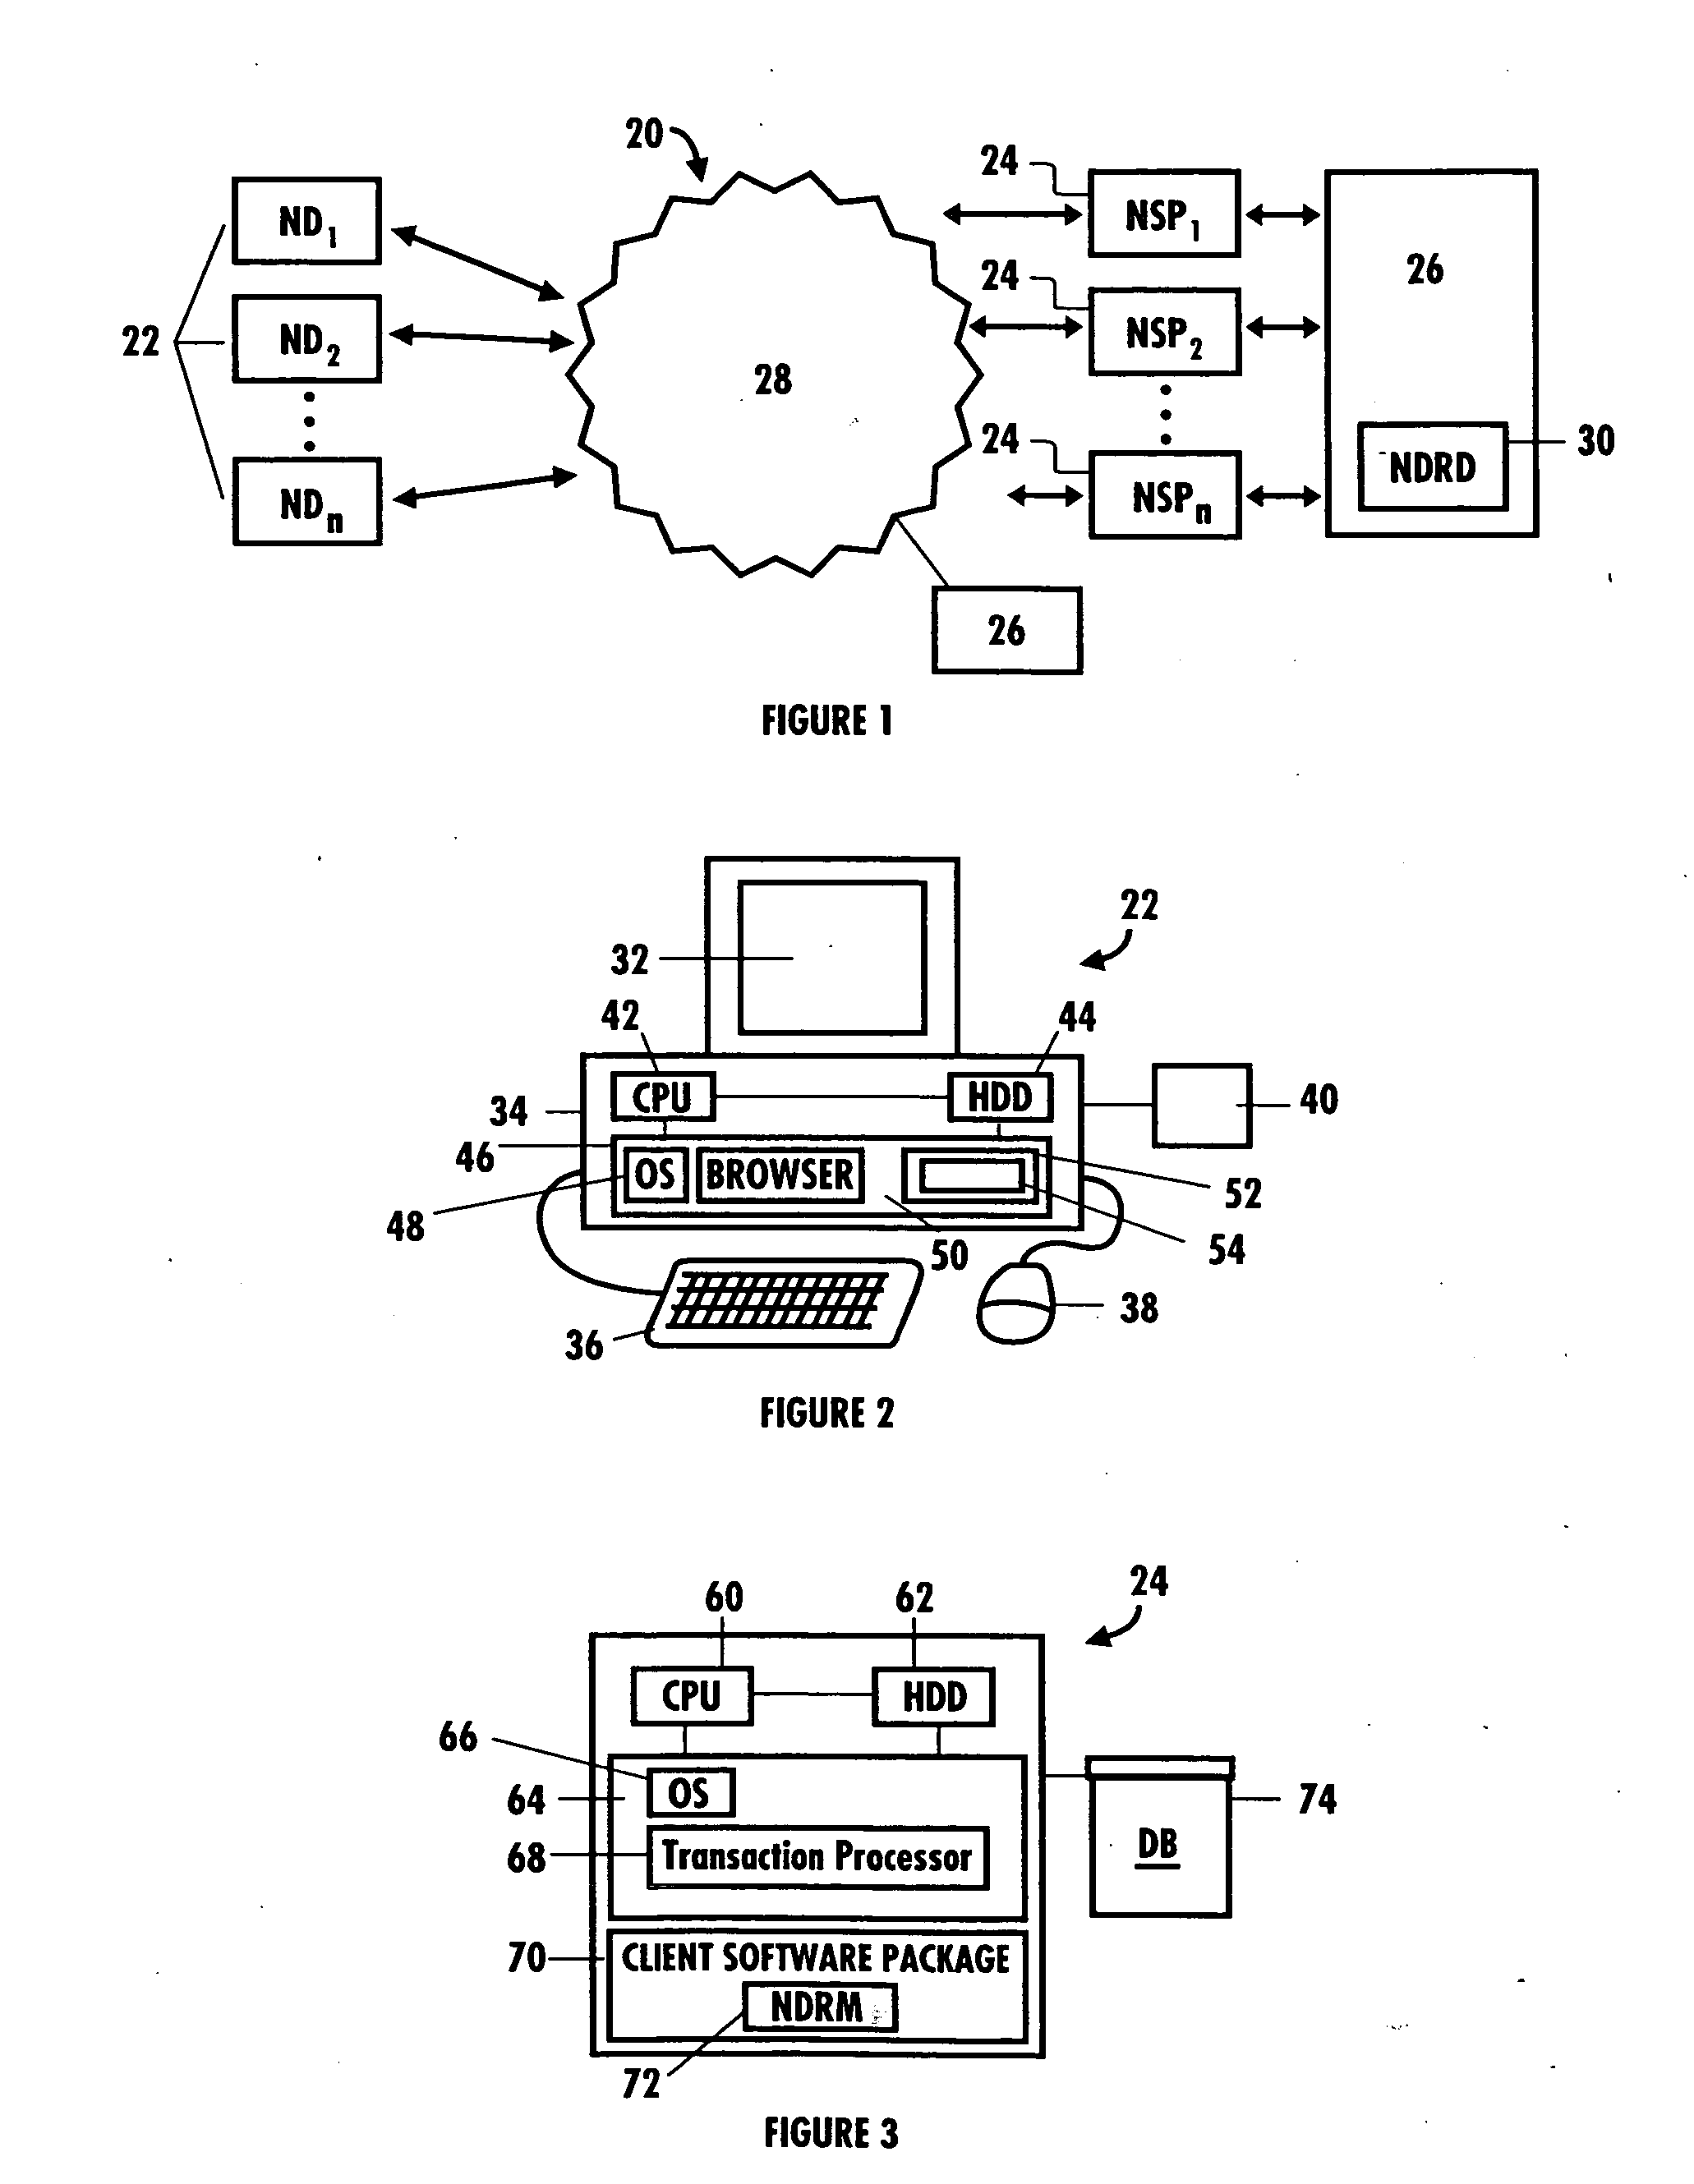 Network security and fraud detection system and method